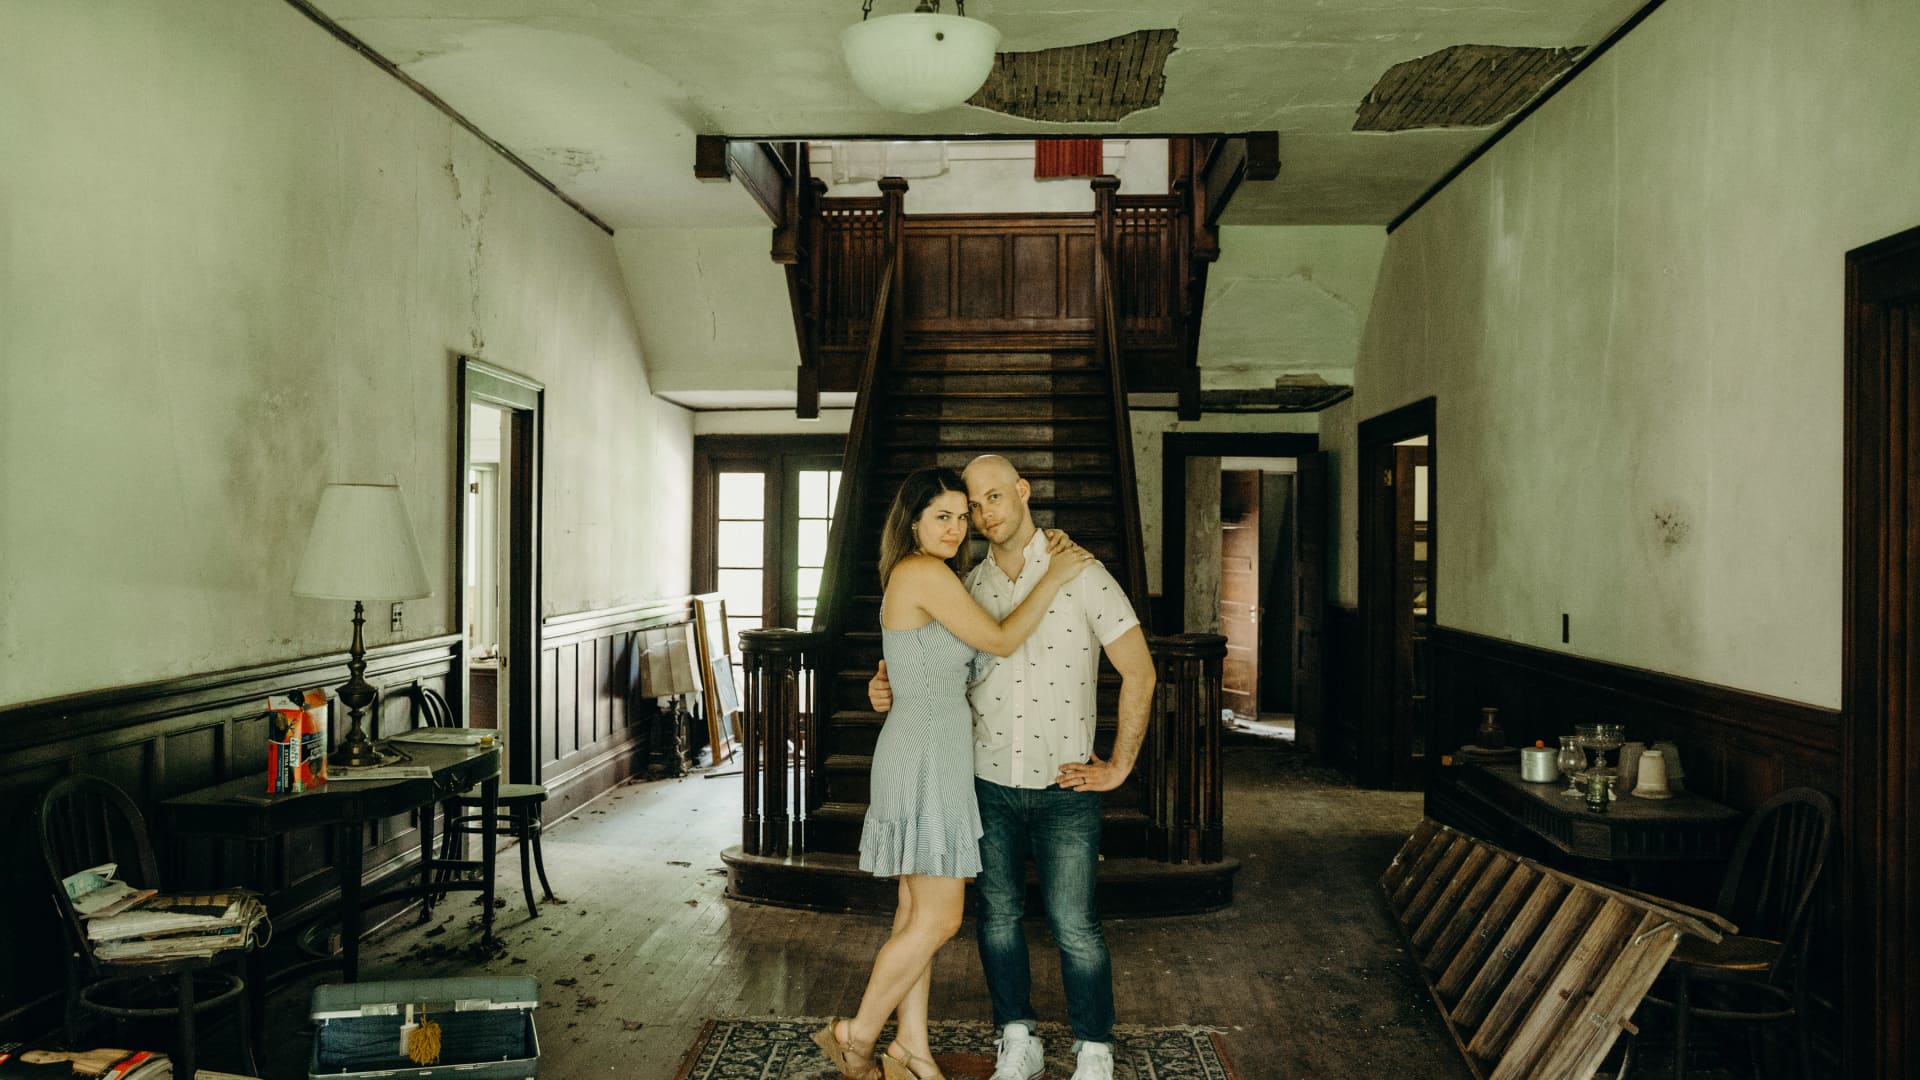 The couple spent $268,000 renovating the Page Mansion, keeping much of the house's old features, furnishing and even furniture.